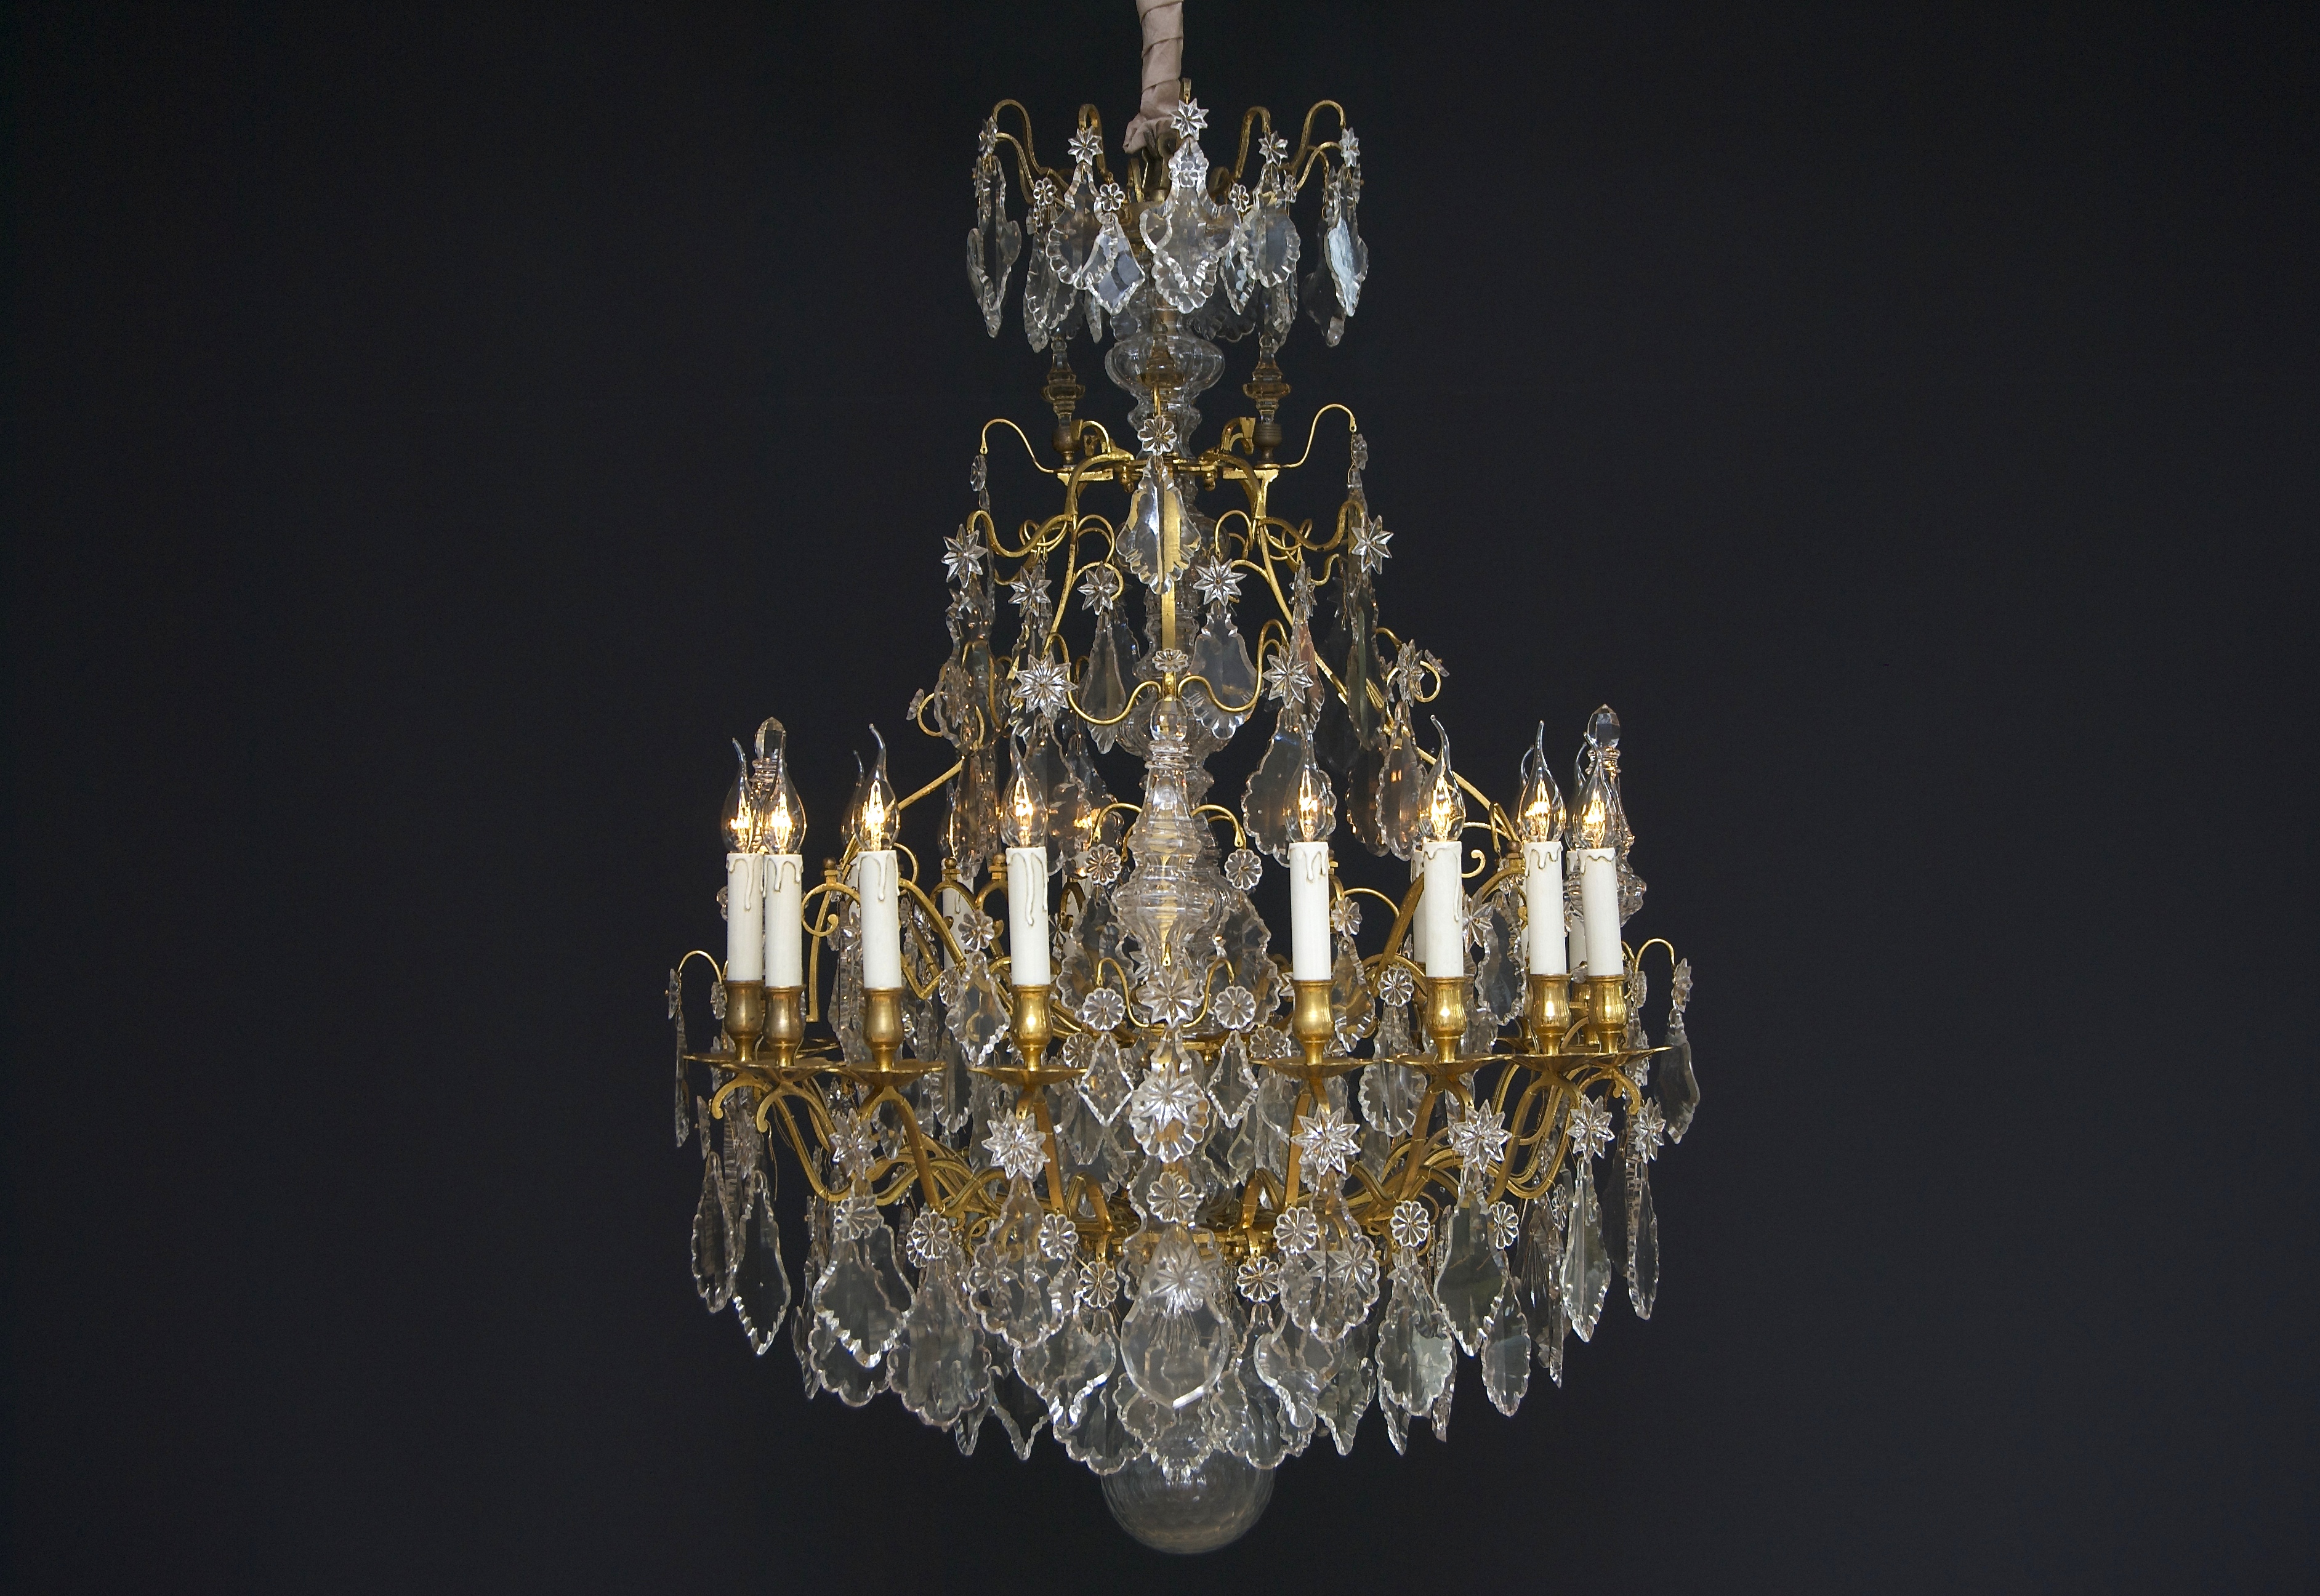 Late 19th century French crystal chandelier